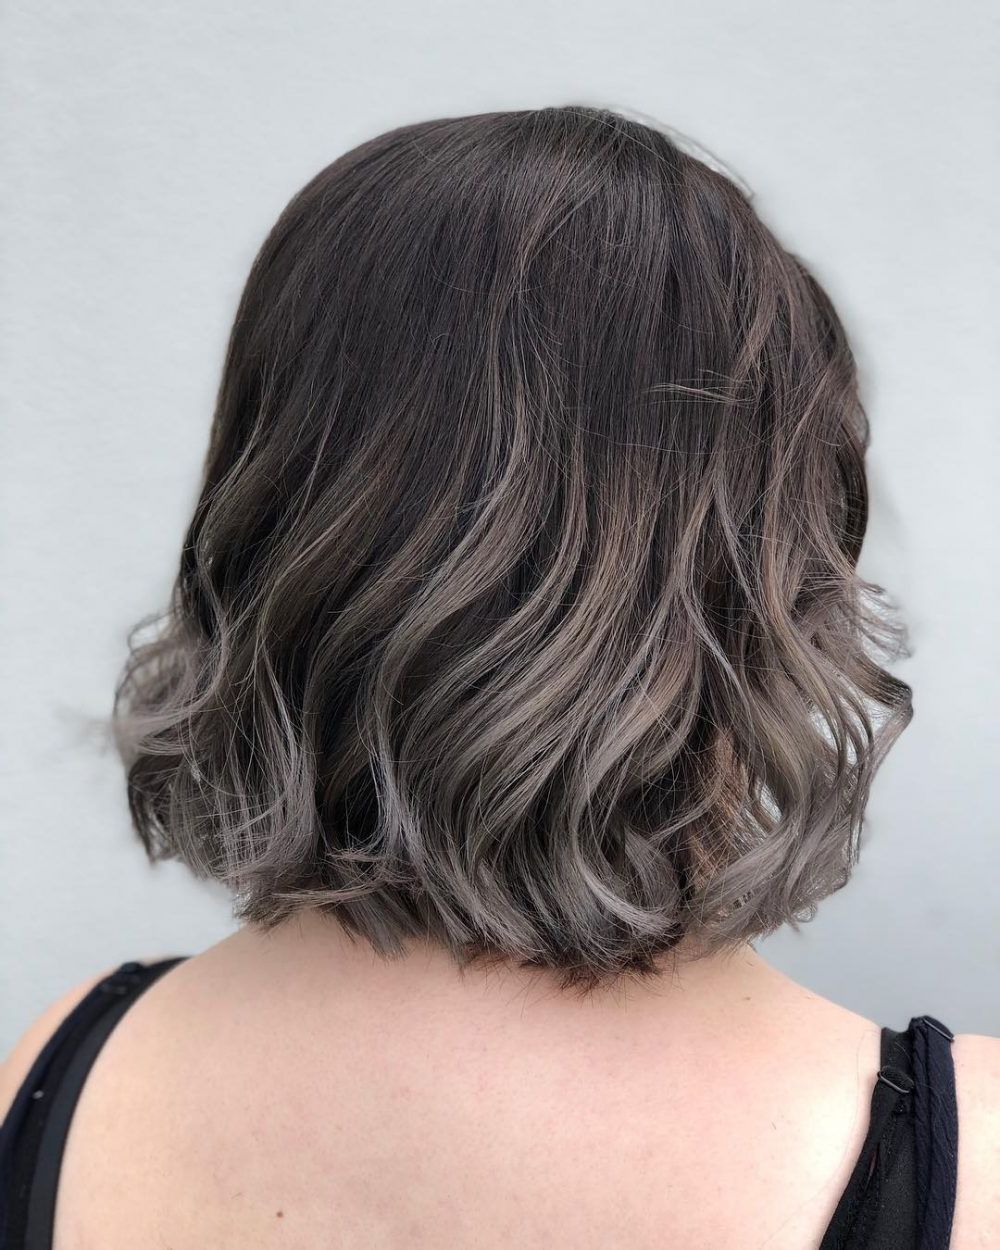 36 Top Short Ombre Hair Ideas Of 2018 With Regard To Short Curly Caramel Brown Bob Hairstyles (Photo 5 of 25)